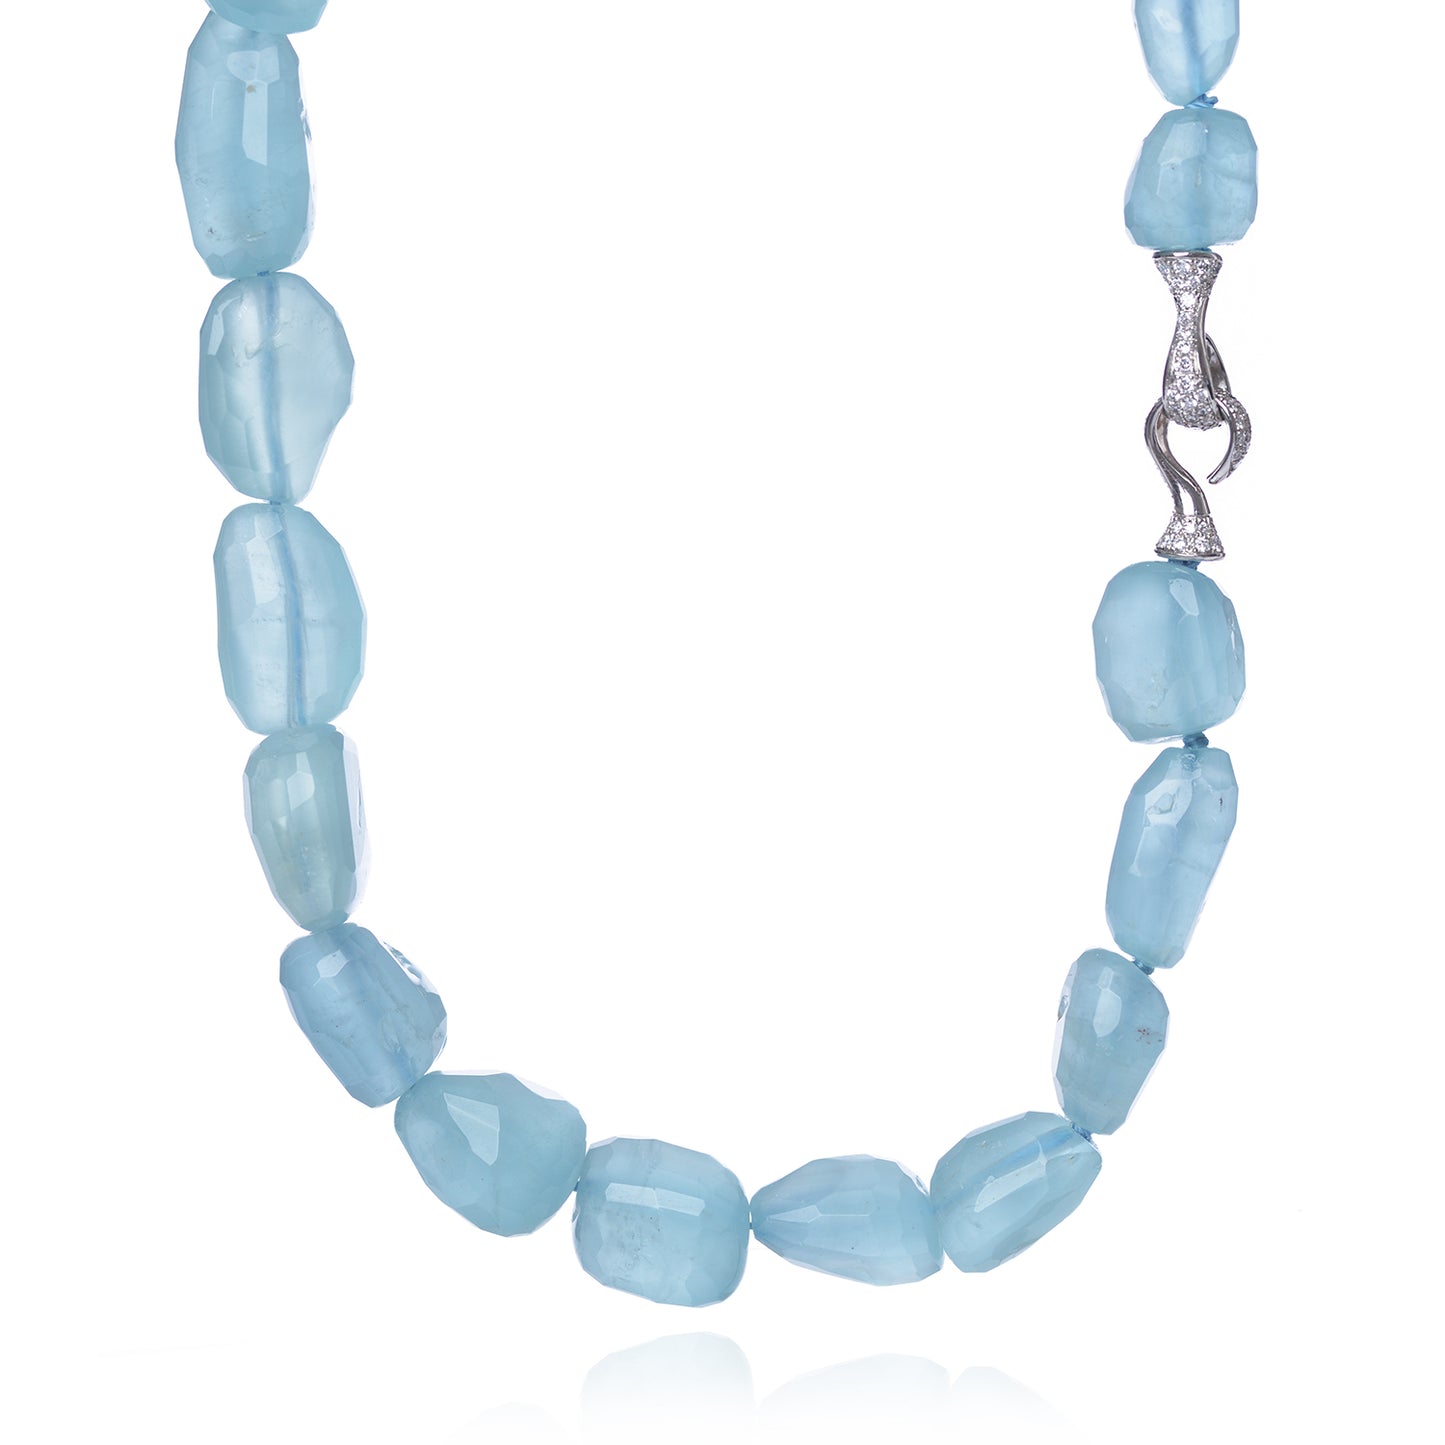 Aquamarine and Diamond Encrusted Clasp Necklace by McFarlane Fine Jewellery